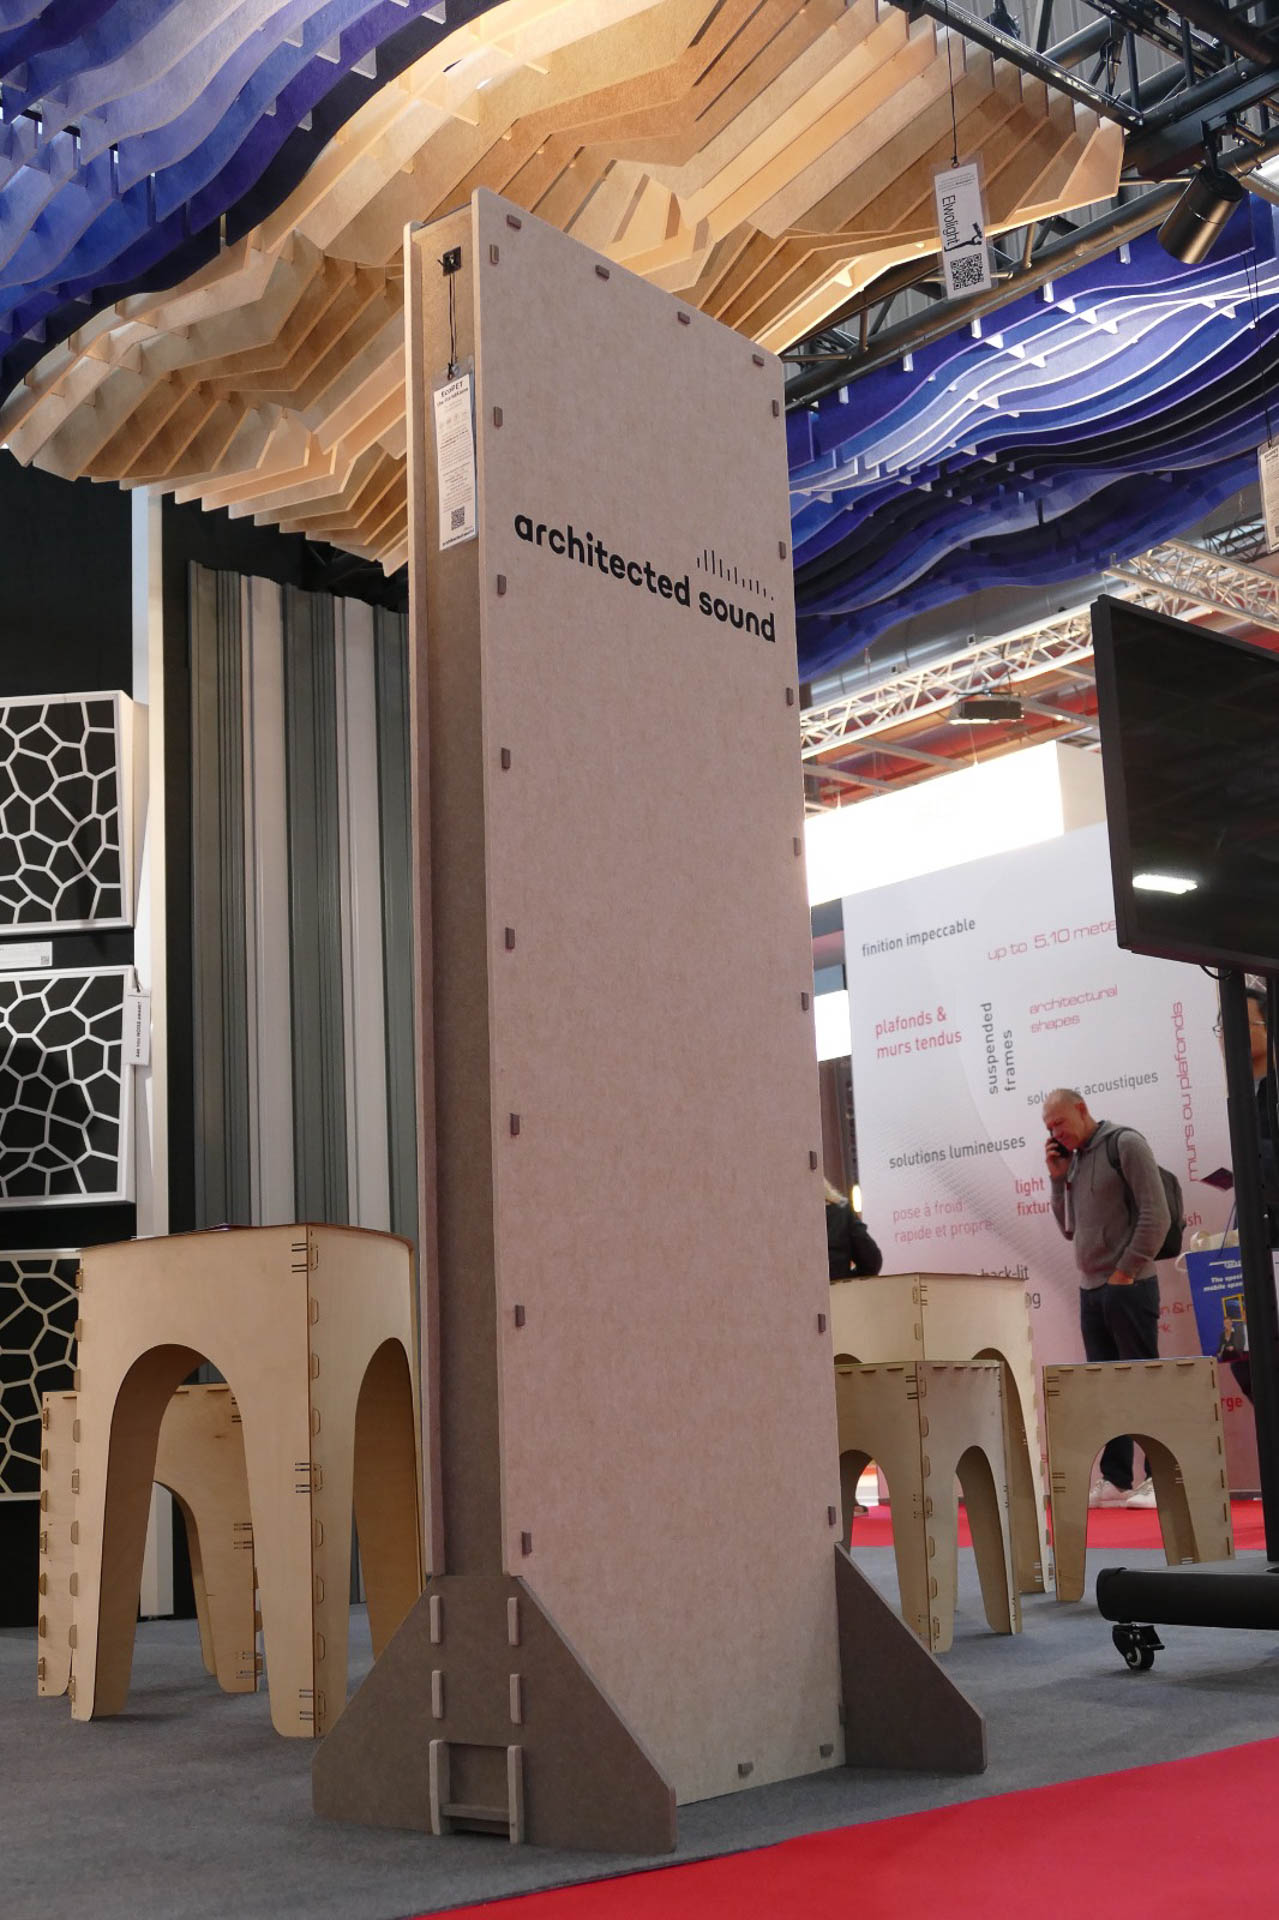 Standalone sound absorbing acoustic screen with custom logo at Batimat 2022 trade show